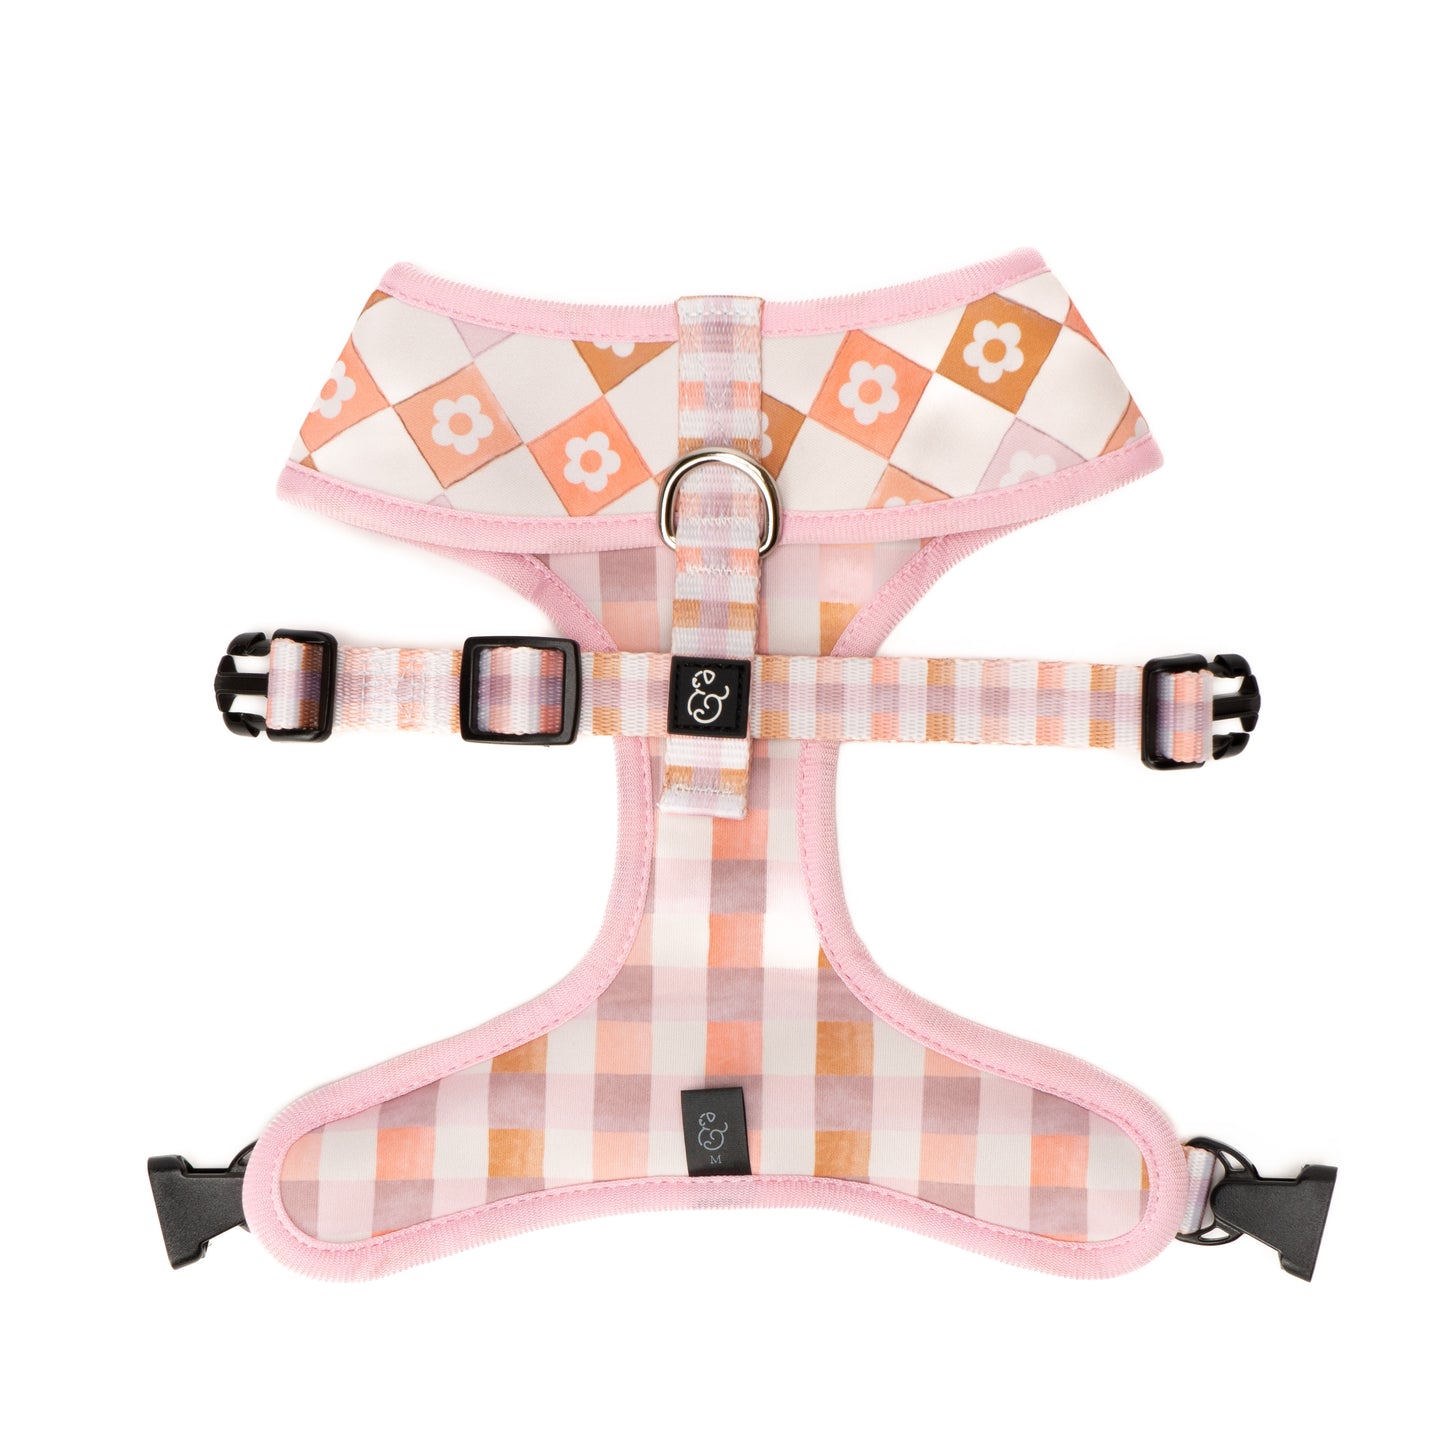 The Daisy Delight Reversible Harness